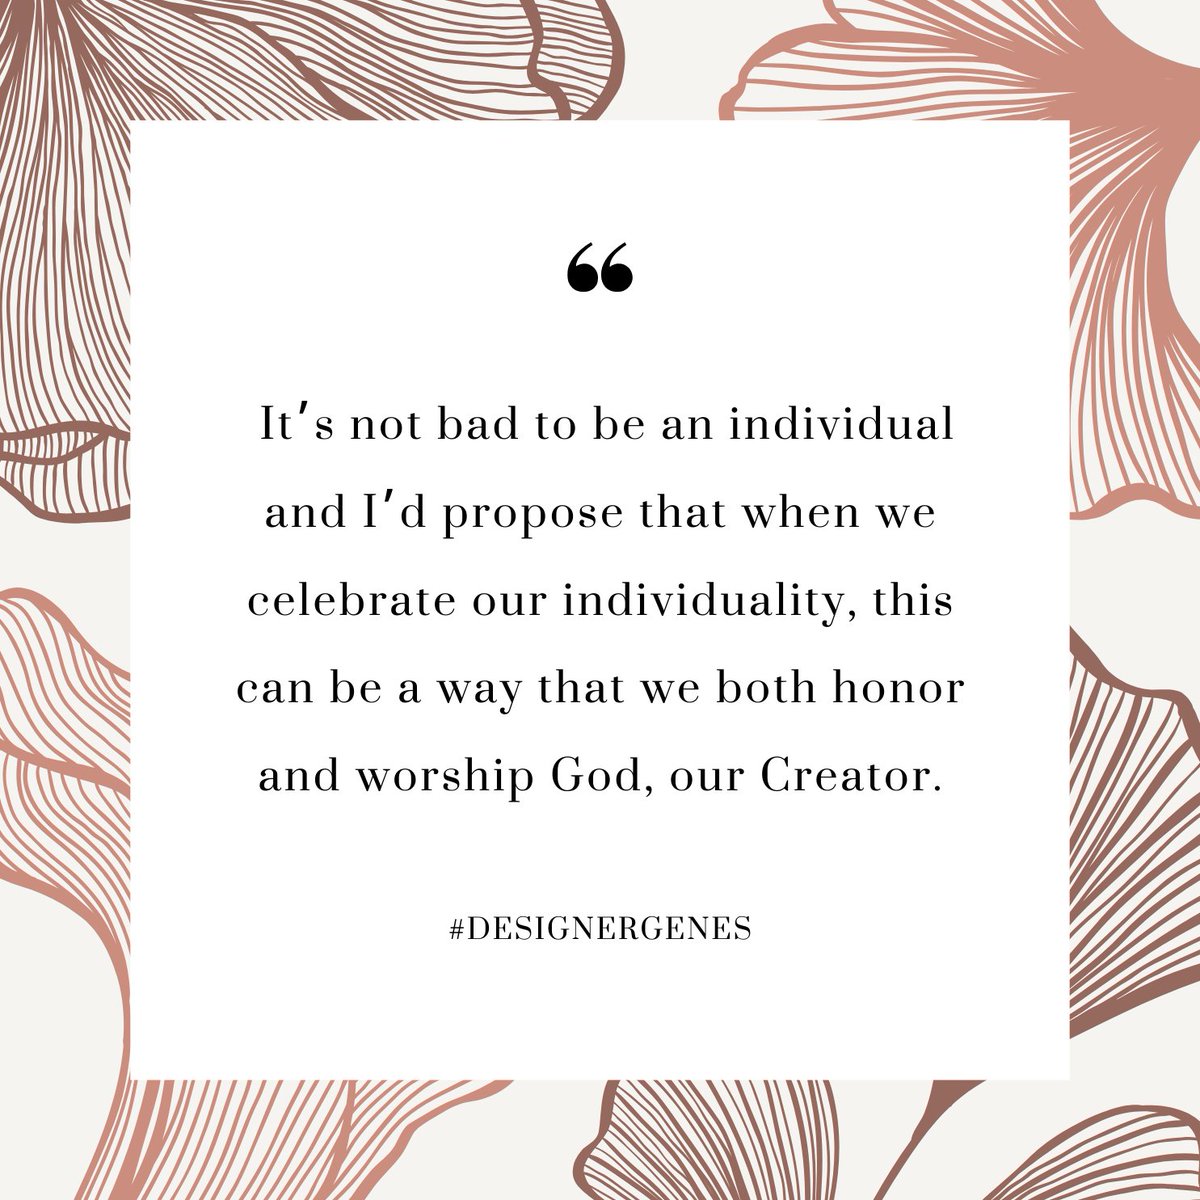 From my new blog post, 'Designer Genes'. I encourage you to go check it out now!
-
sarahbowling.org/designer-genes/
-
#Designer #God #Christian #Bible #Blog #Christianblogger